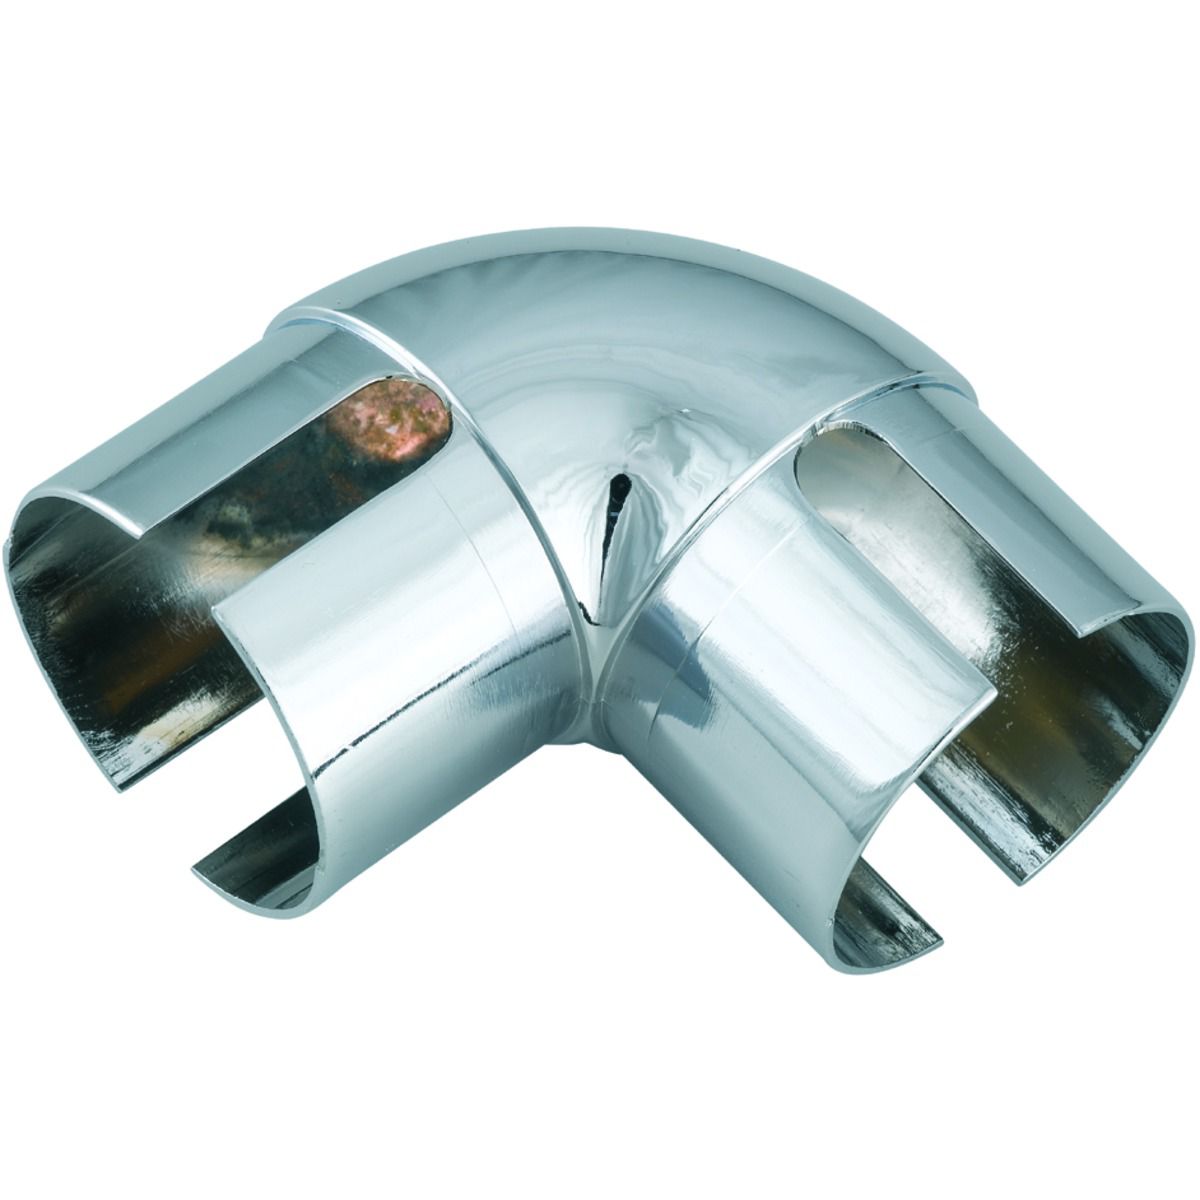 Image of Wickes Handrail 90° Elbow - Chrome